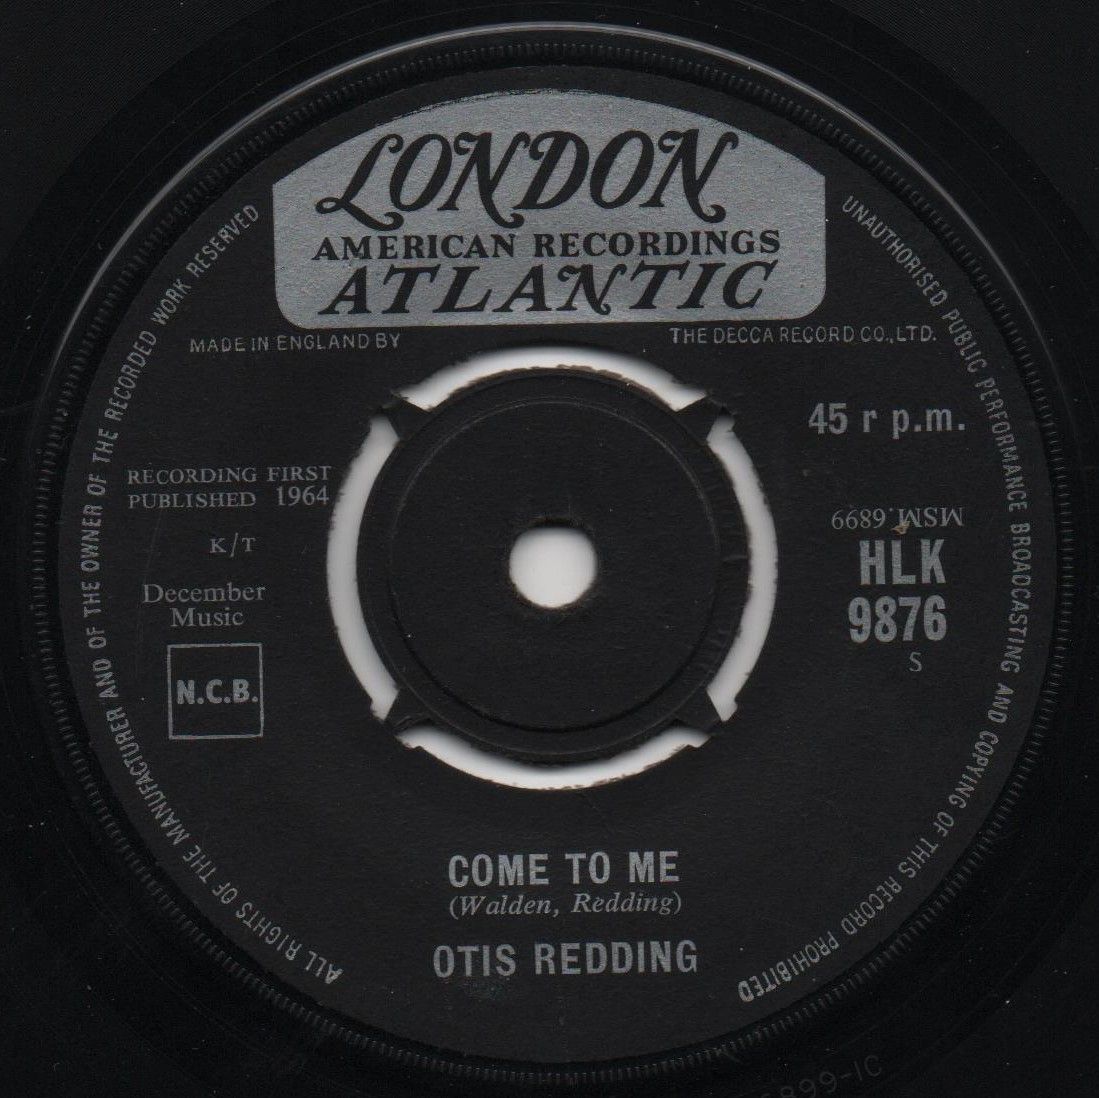 OTIS REDDING - COME TO ME / DONT LEAVE ME THIS WAY